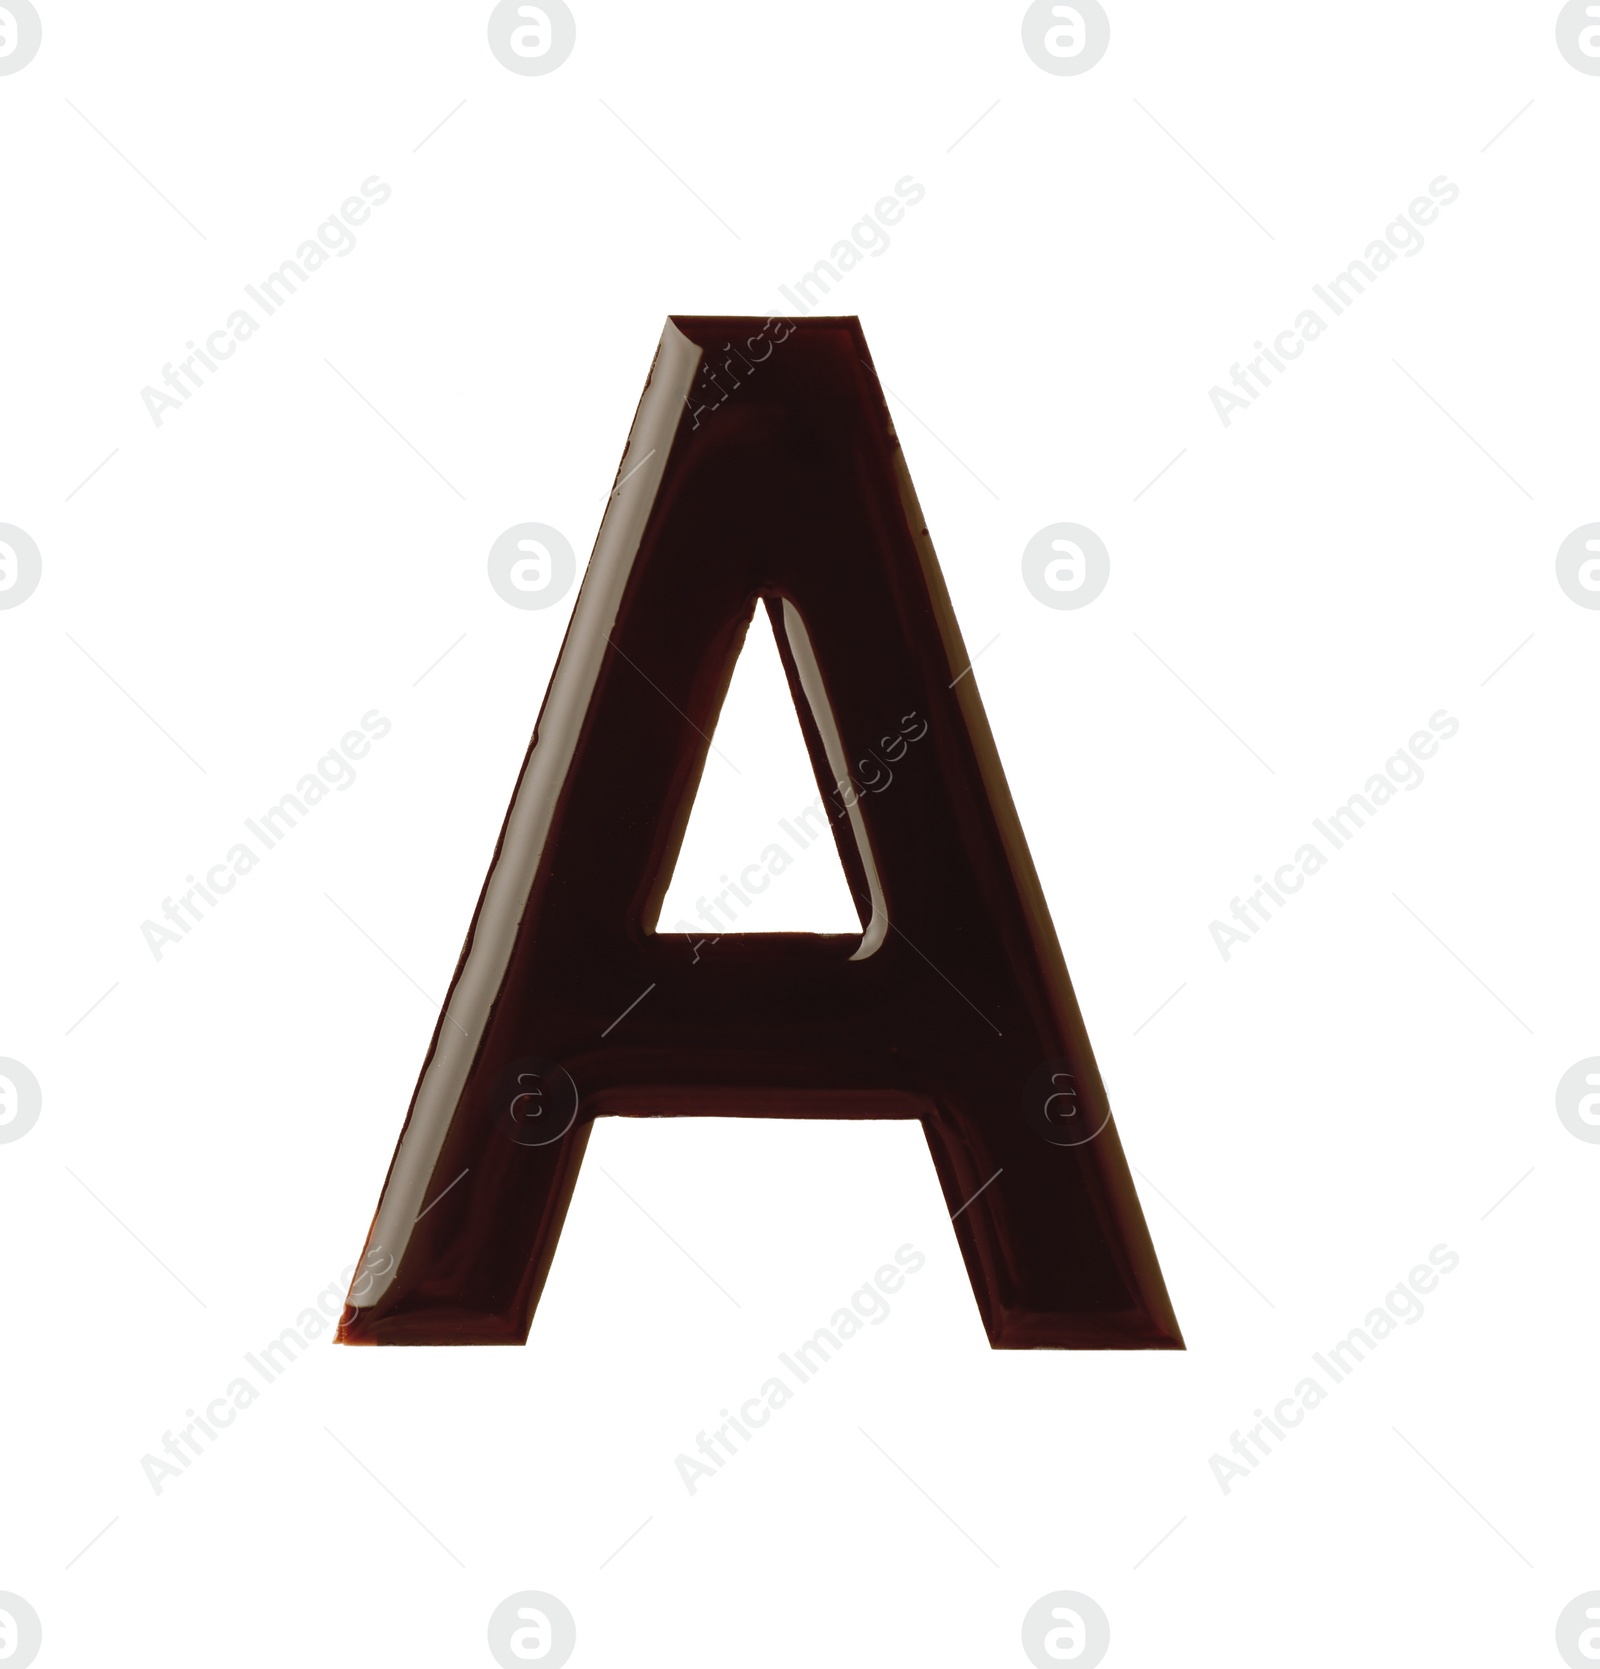 Photo of Letter A made of chocolate on white background